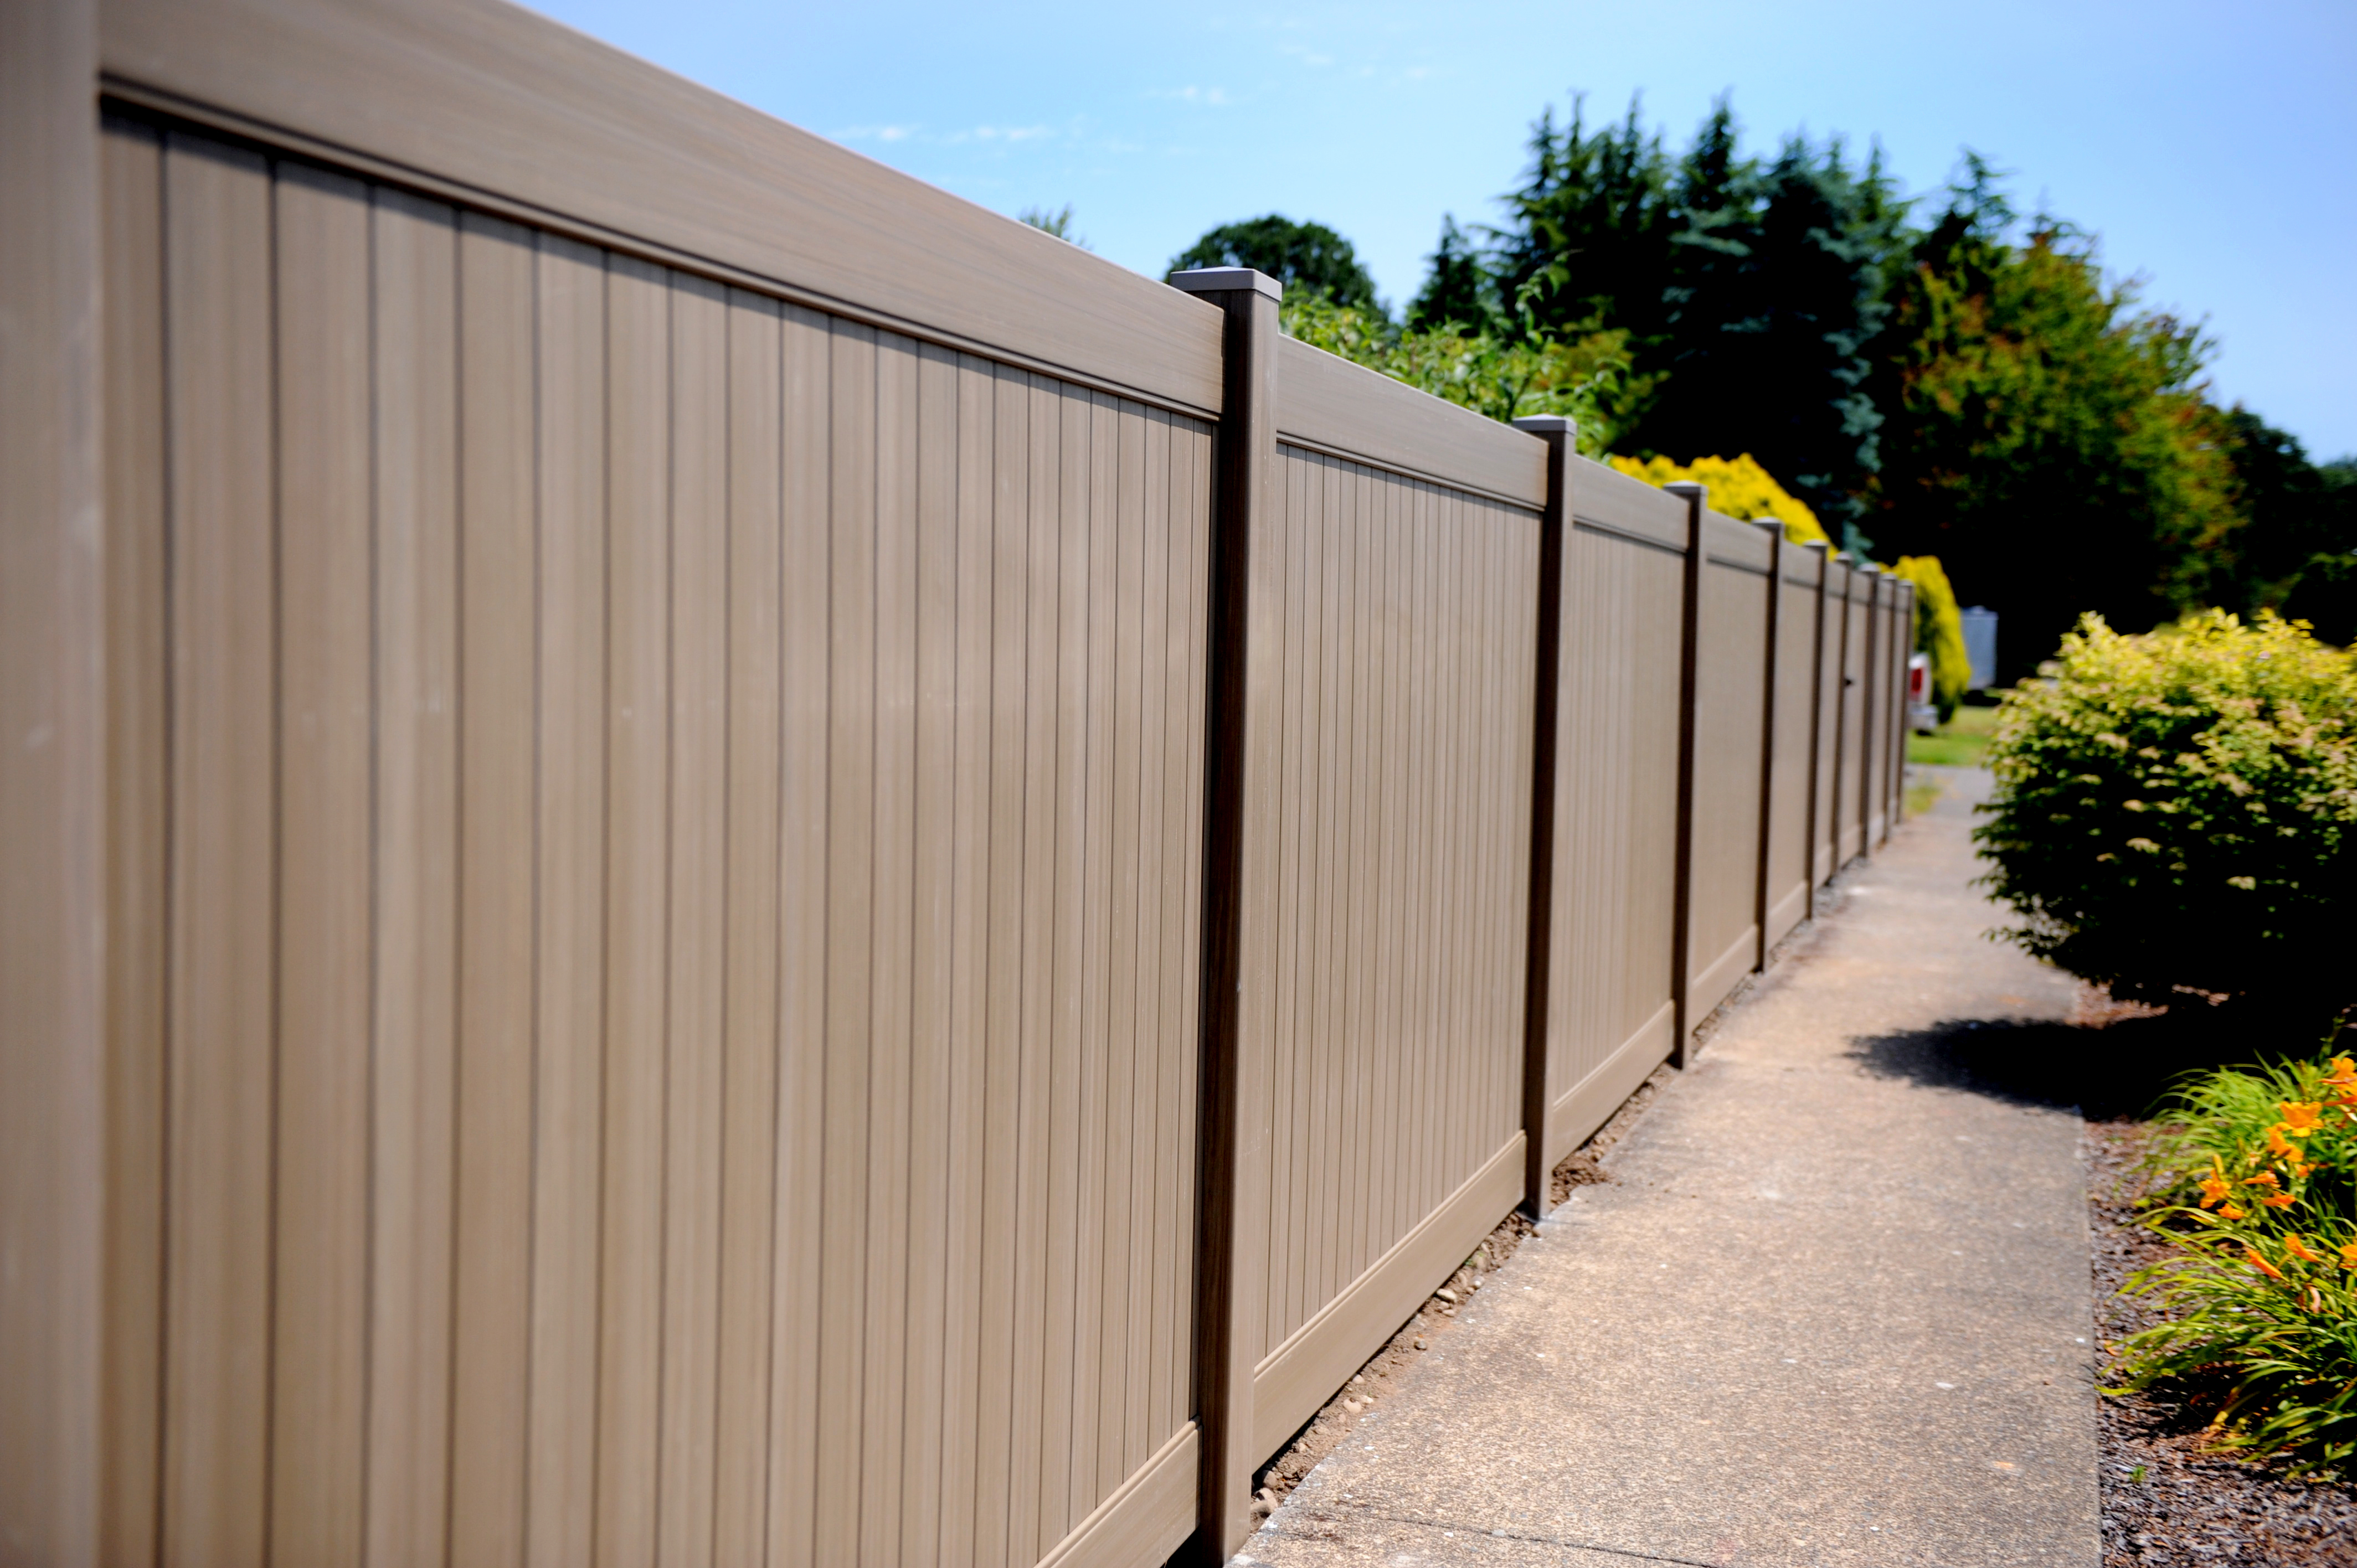 8 Ft Tall Vinyl Privacy Fence Panels • Fence Ideas Site